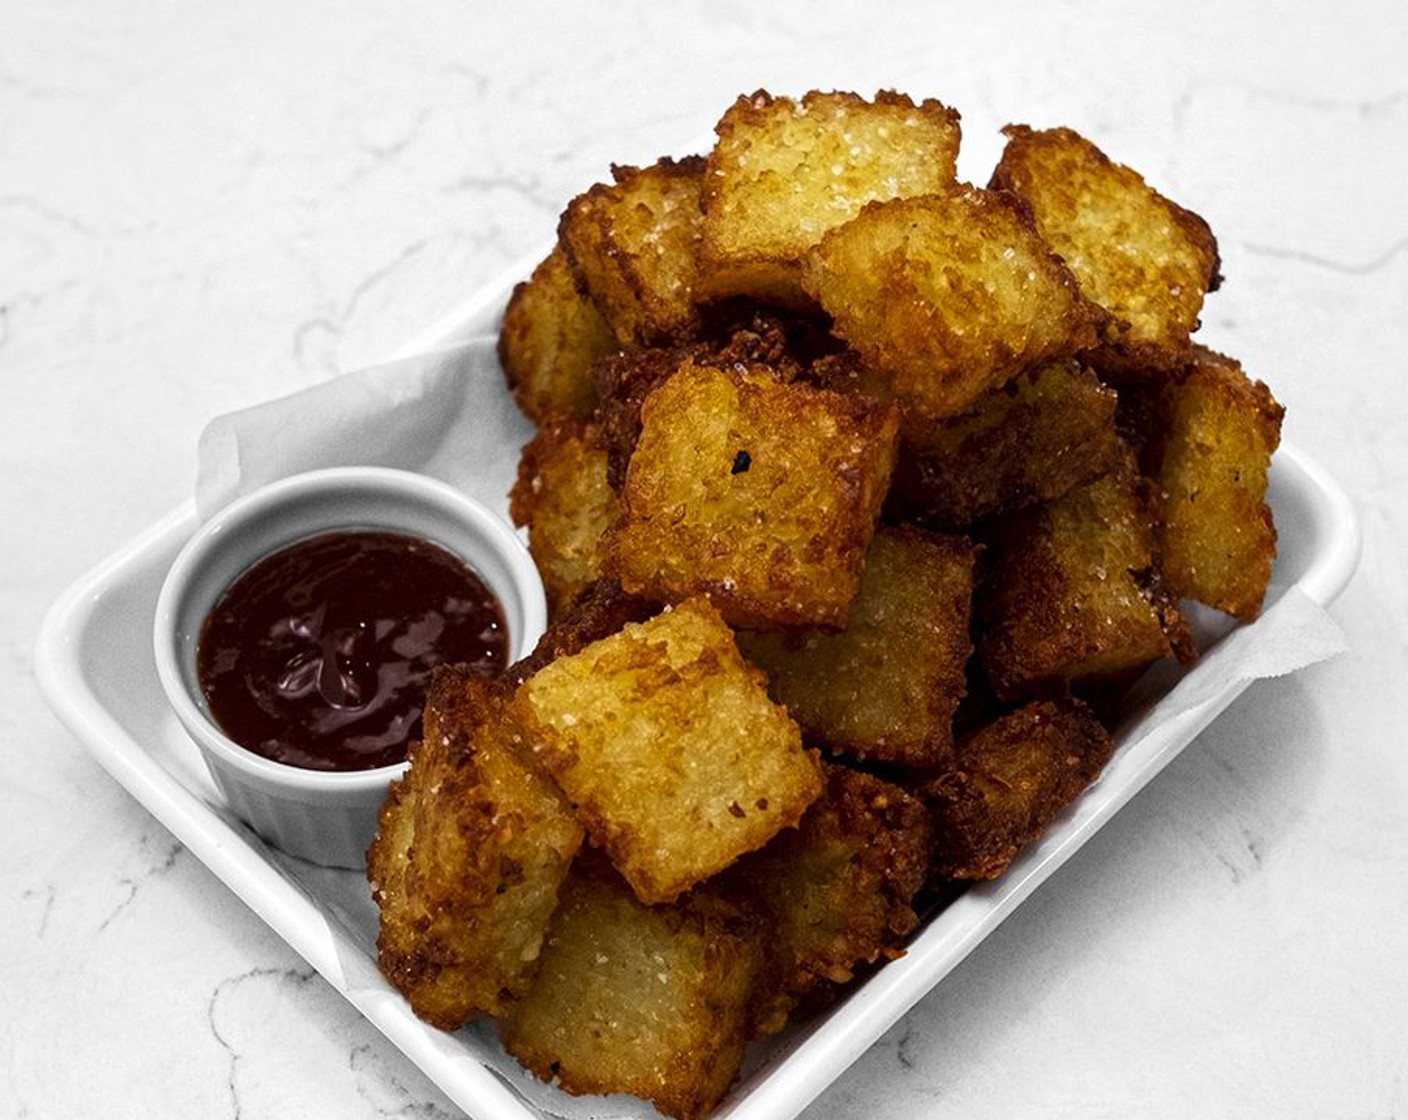 step 6 Serve tater tots warm with your favorite dipping sauces!